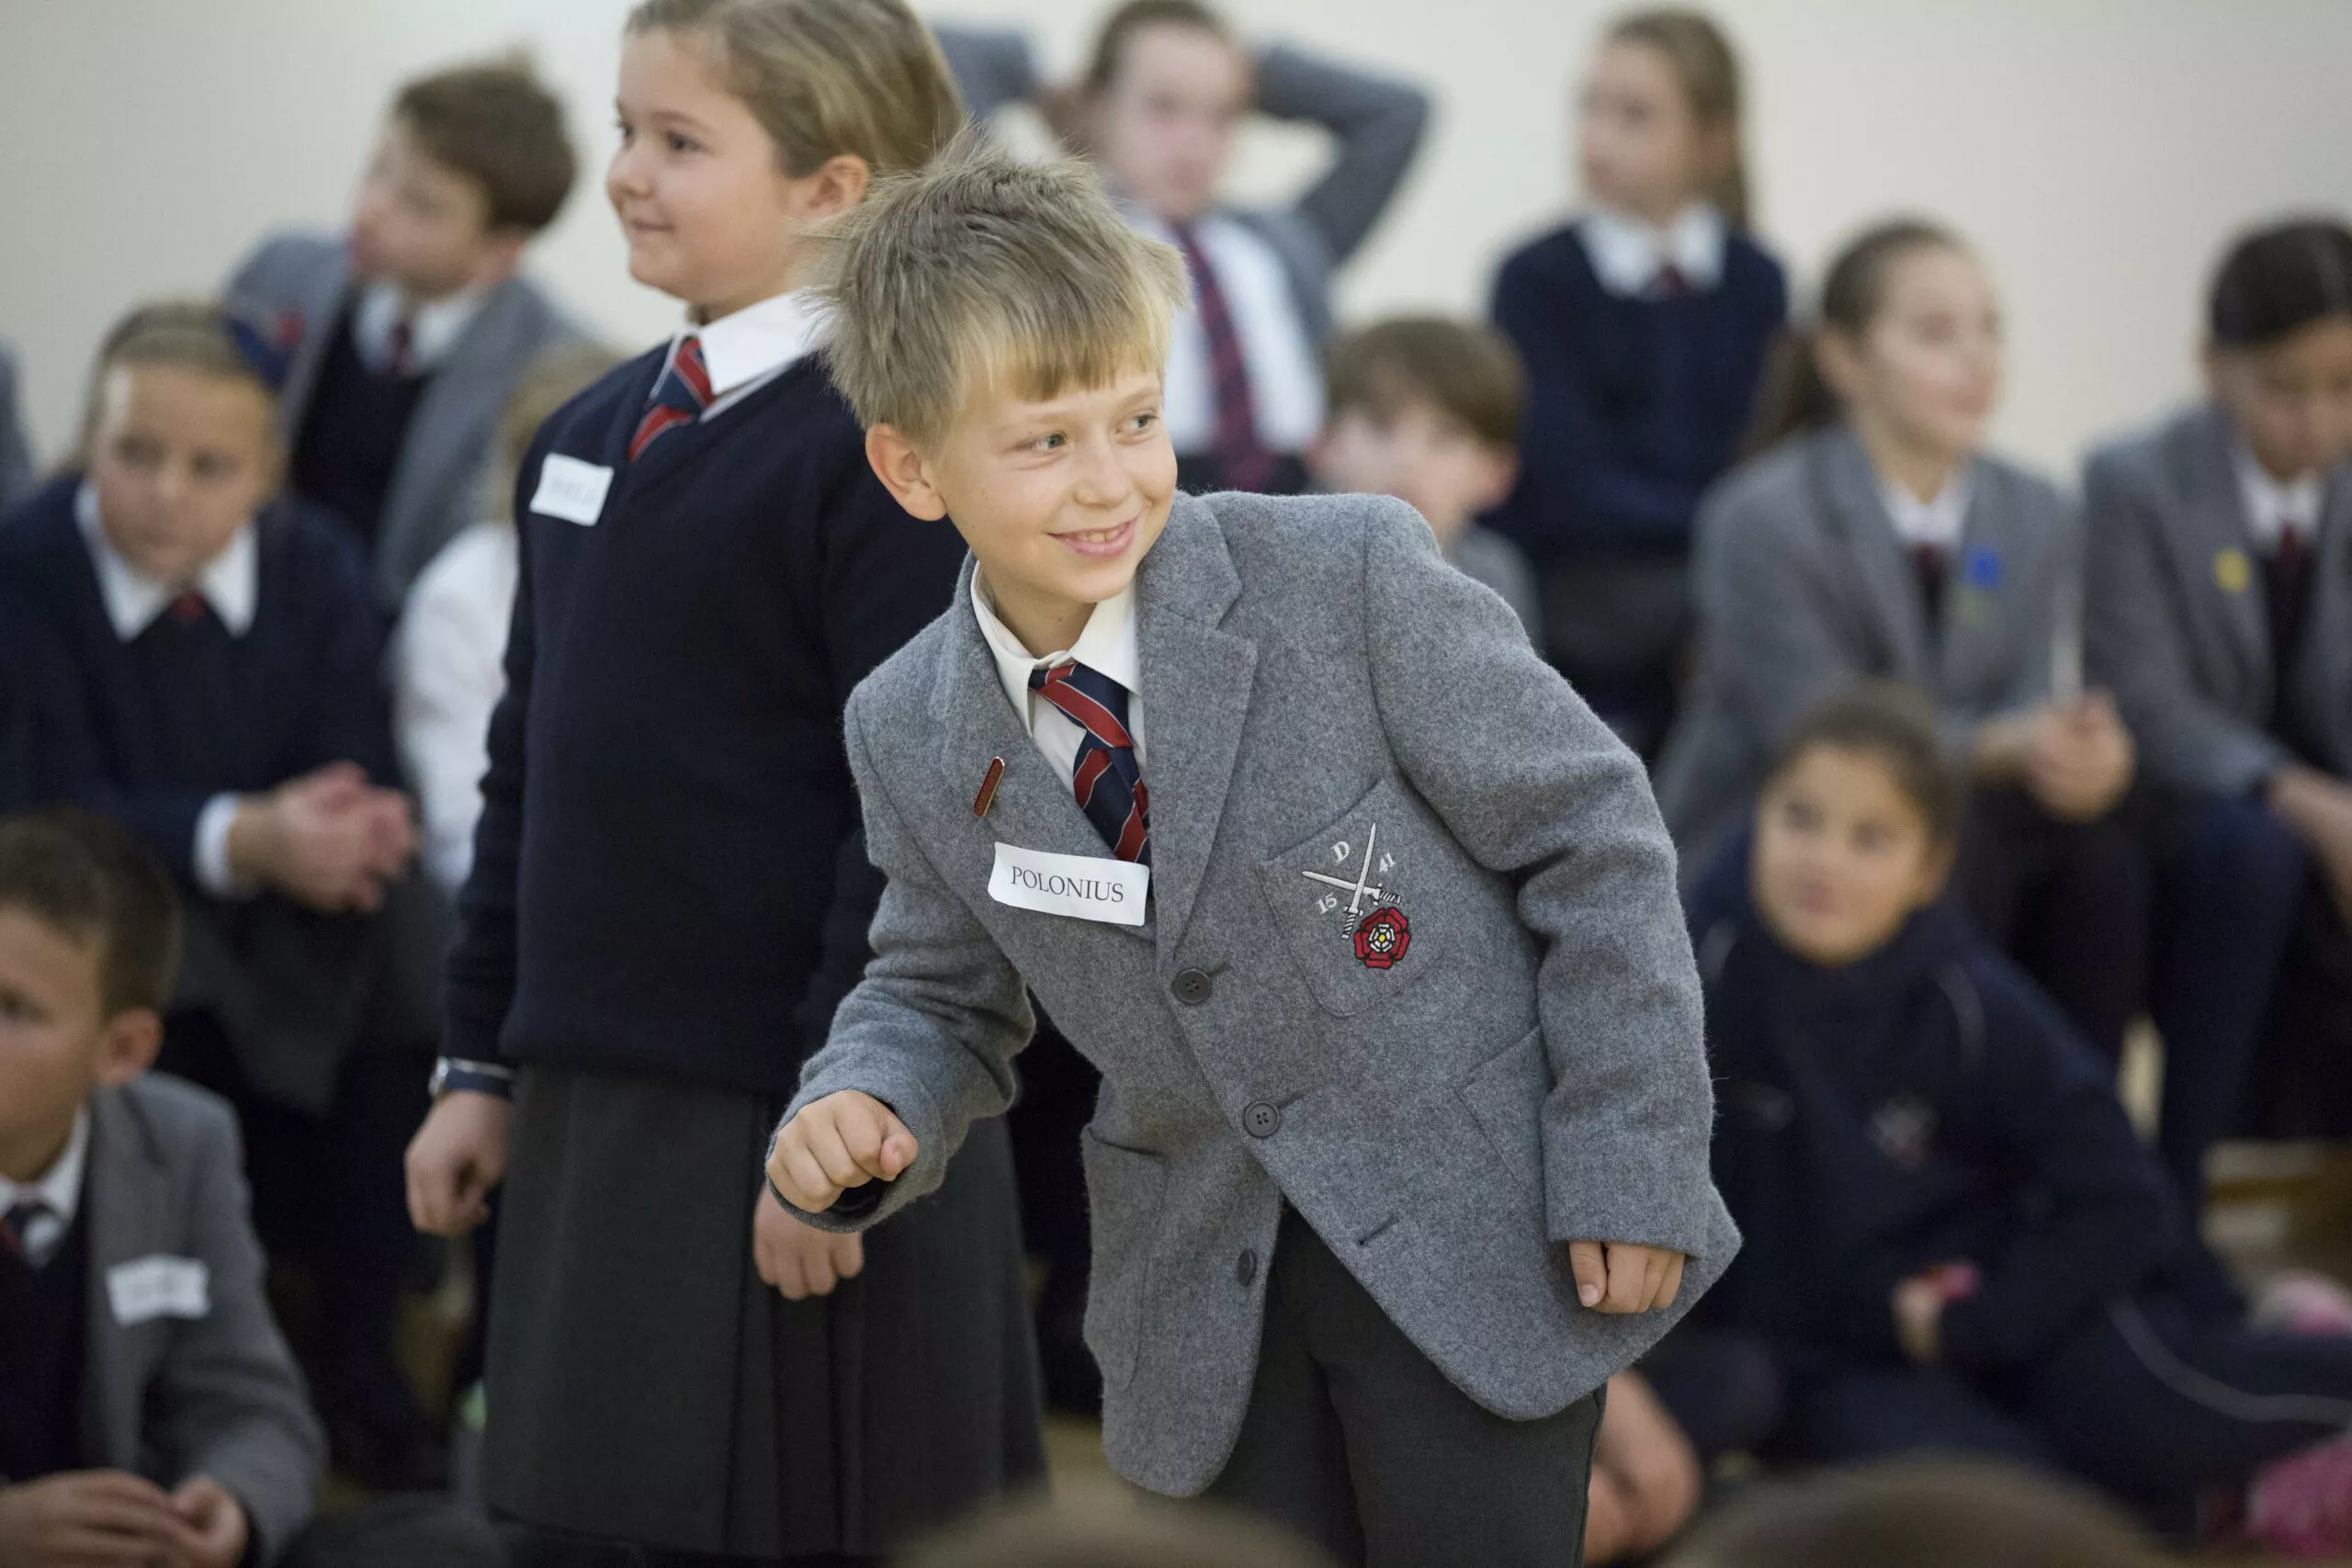 Engaging Shakespeare experience enjoyed by Prep pupils